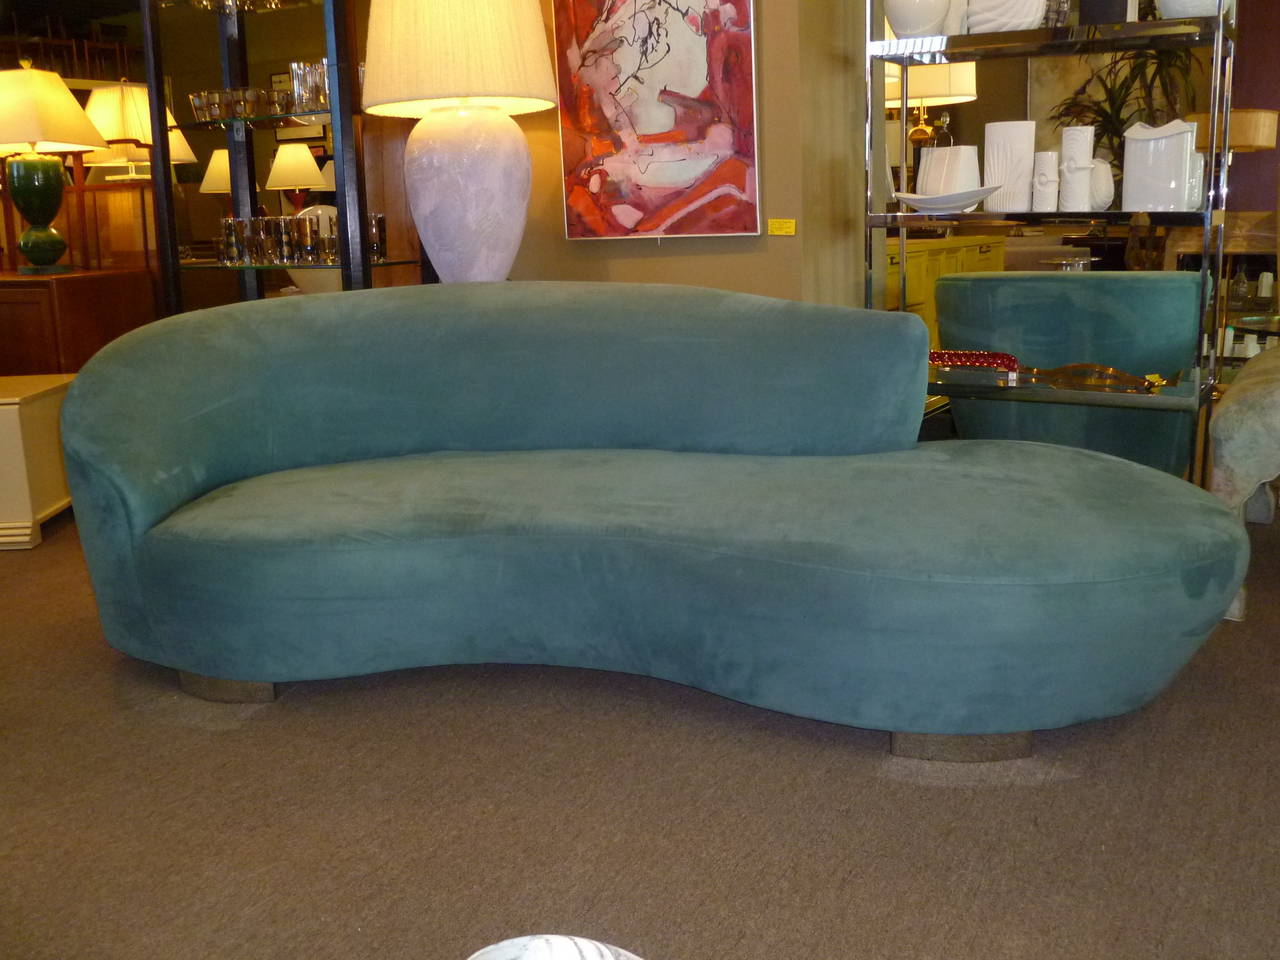 SOLD  In teal blue ultra suede, a Serpentine sofa by Vladimir Kagan for Directional. Original lustrous ultra suede. Chrome curved feet. Very, very nice original condition.

Measurements: 8 feet wide x 45